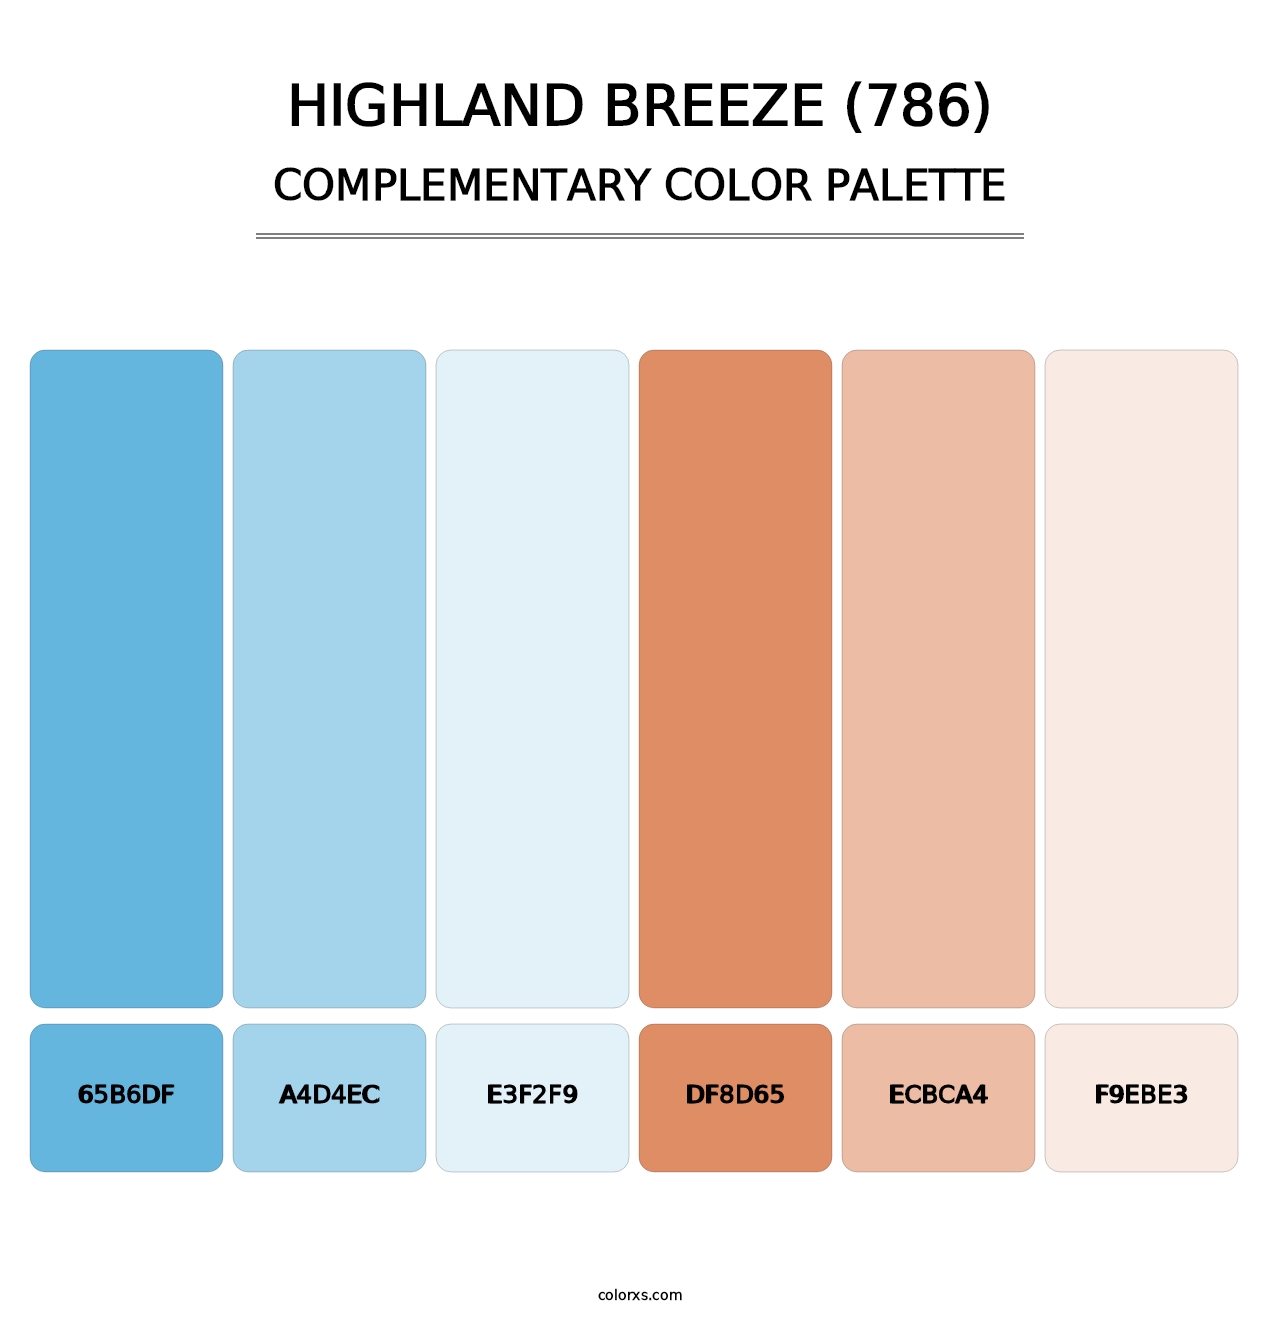 Highland Breeze (786) - Complementary Color Palette